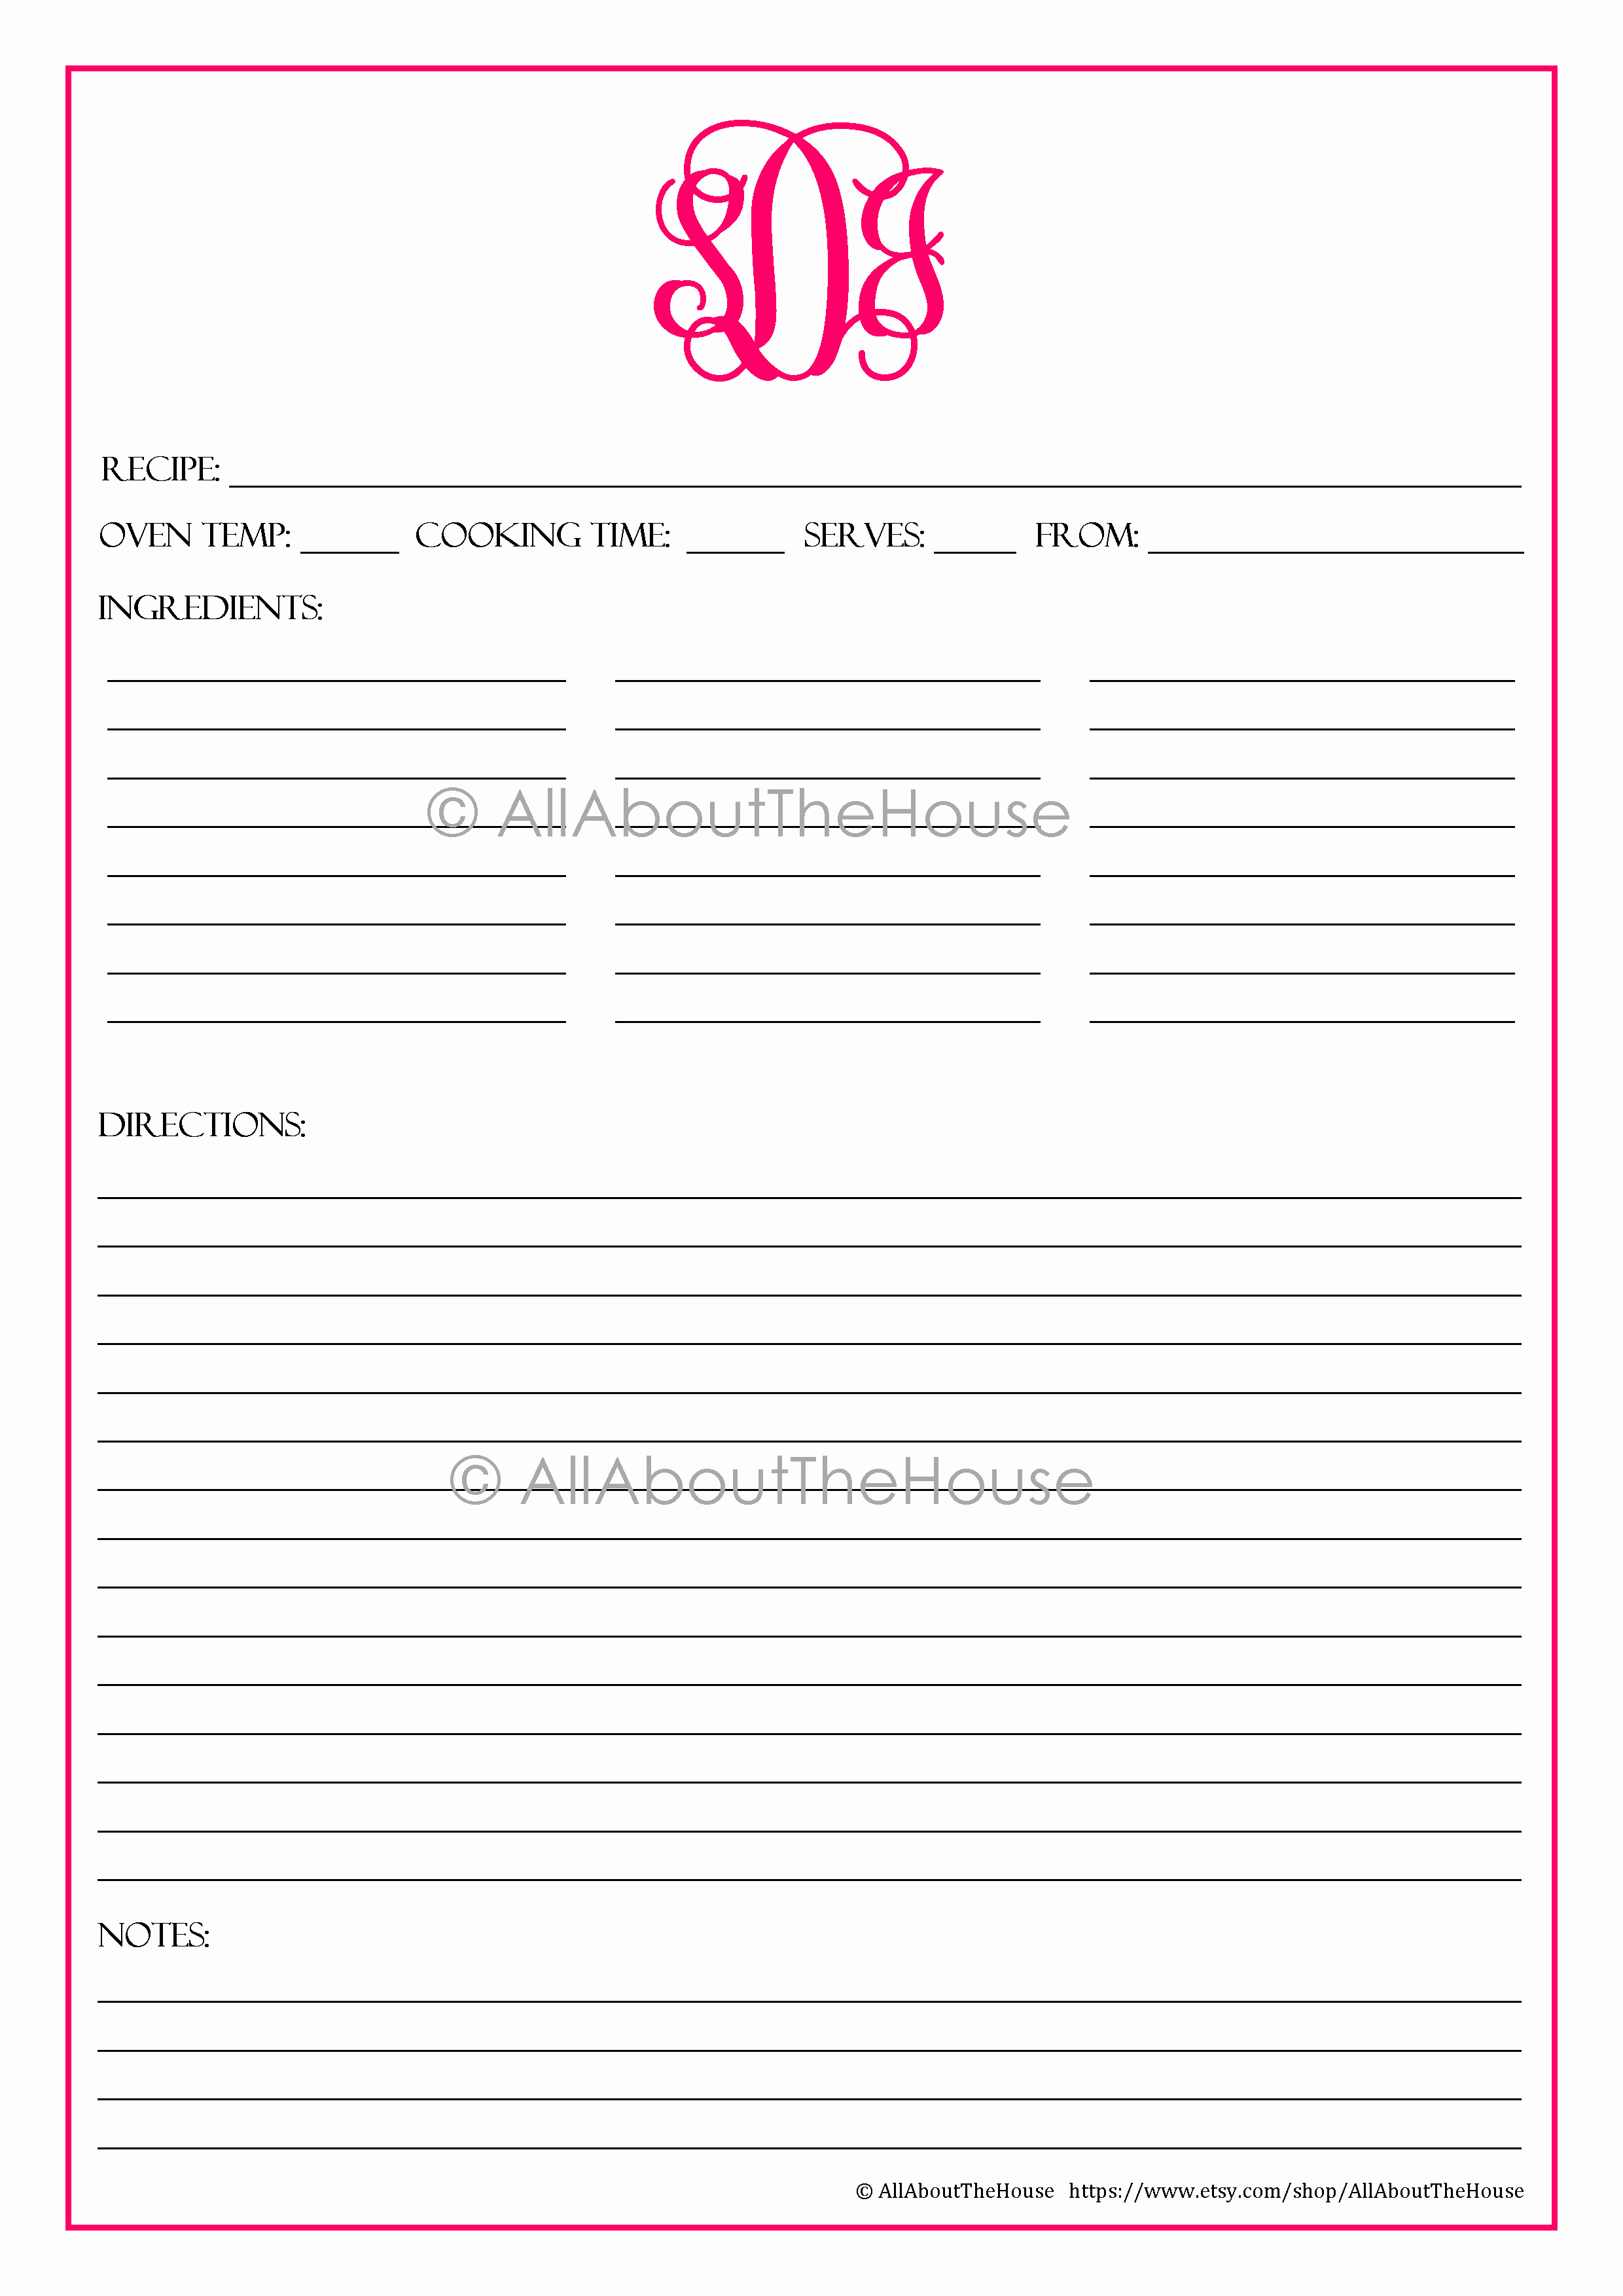 Full Page Recipe Template Editable Awesome Make Your Own Personalised Printable Recipe Binder